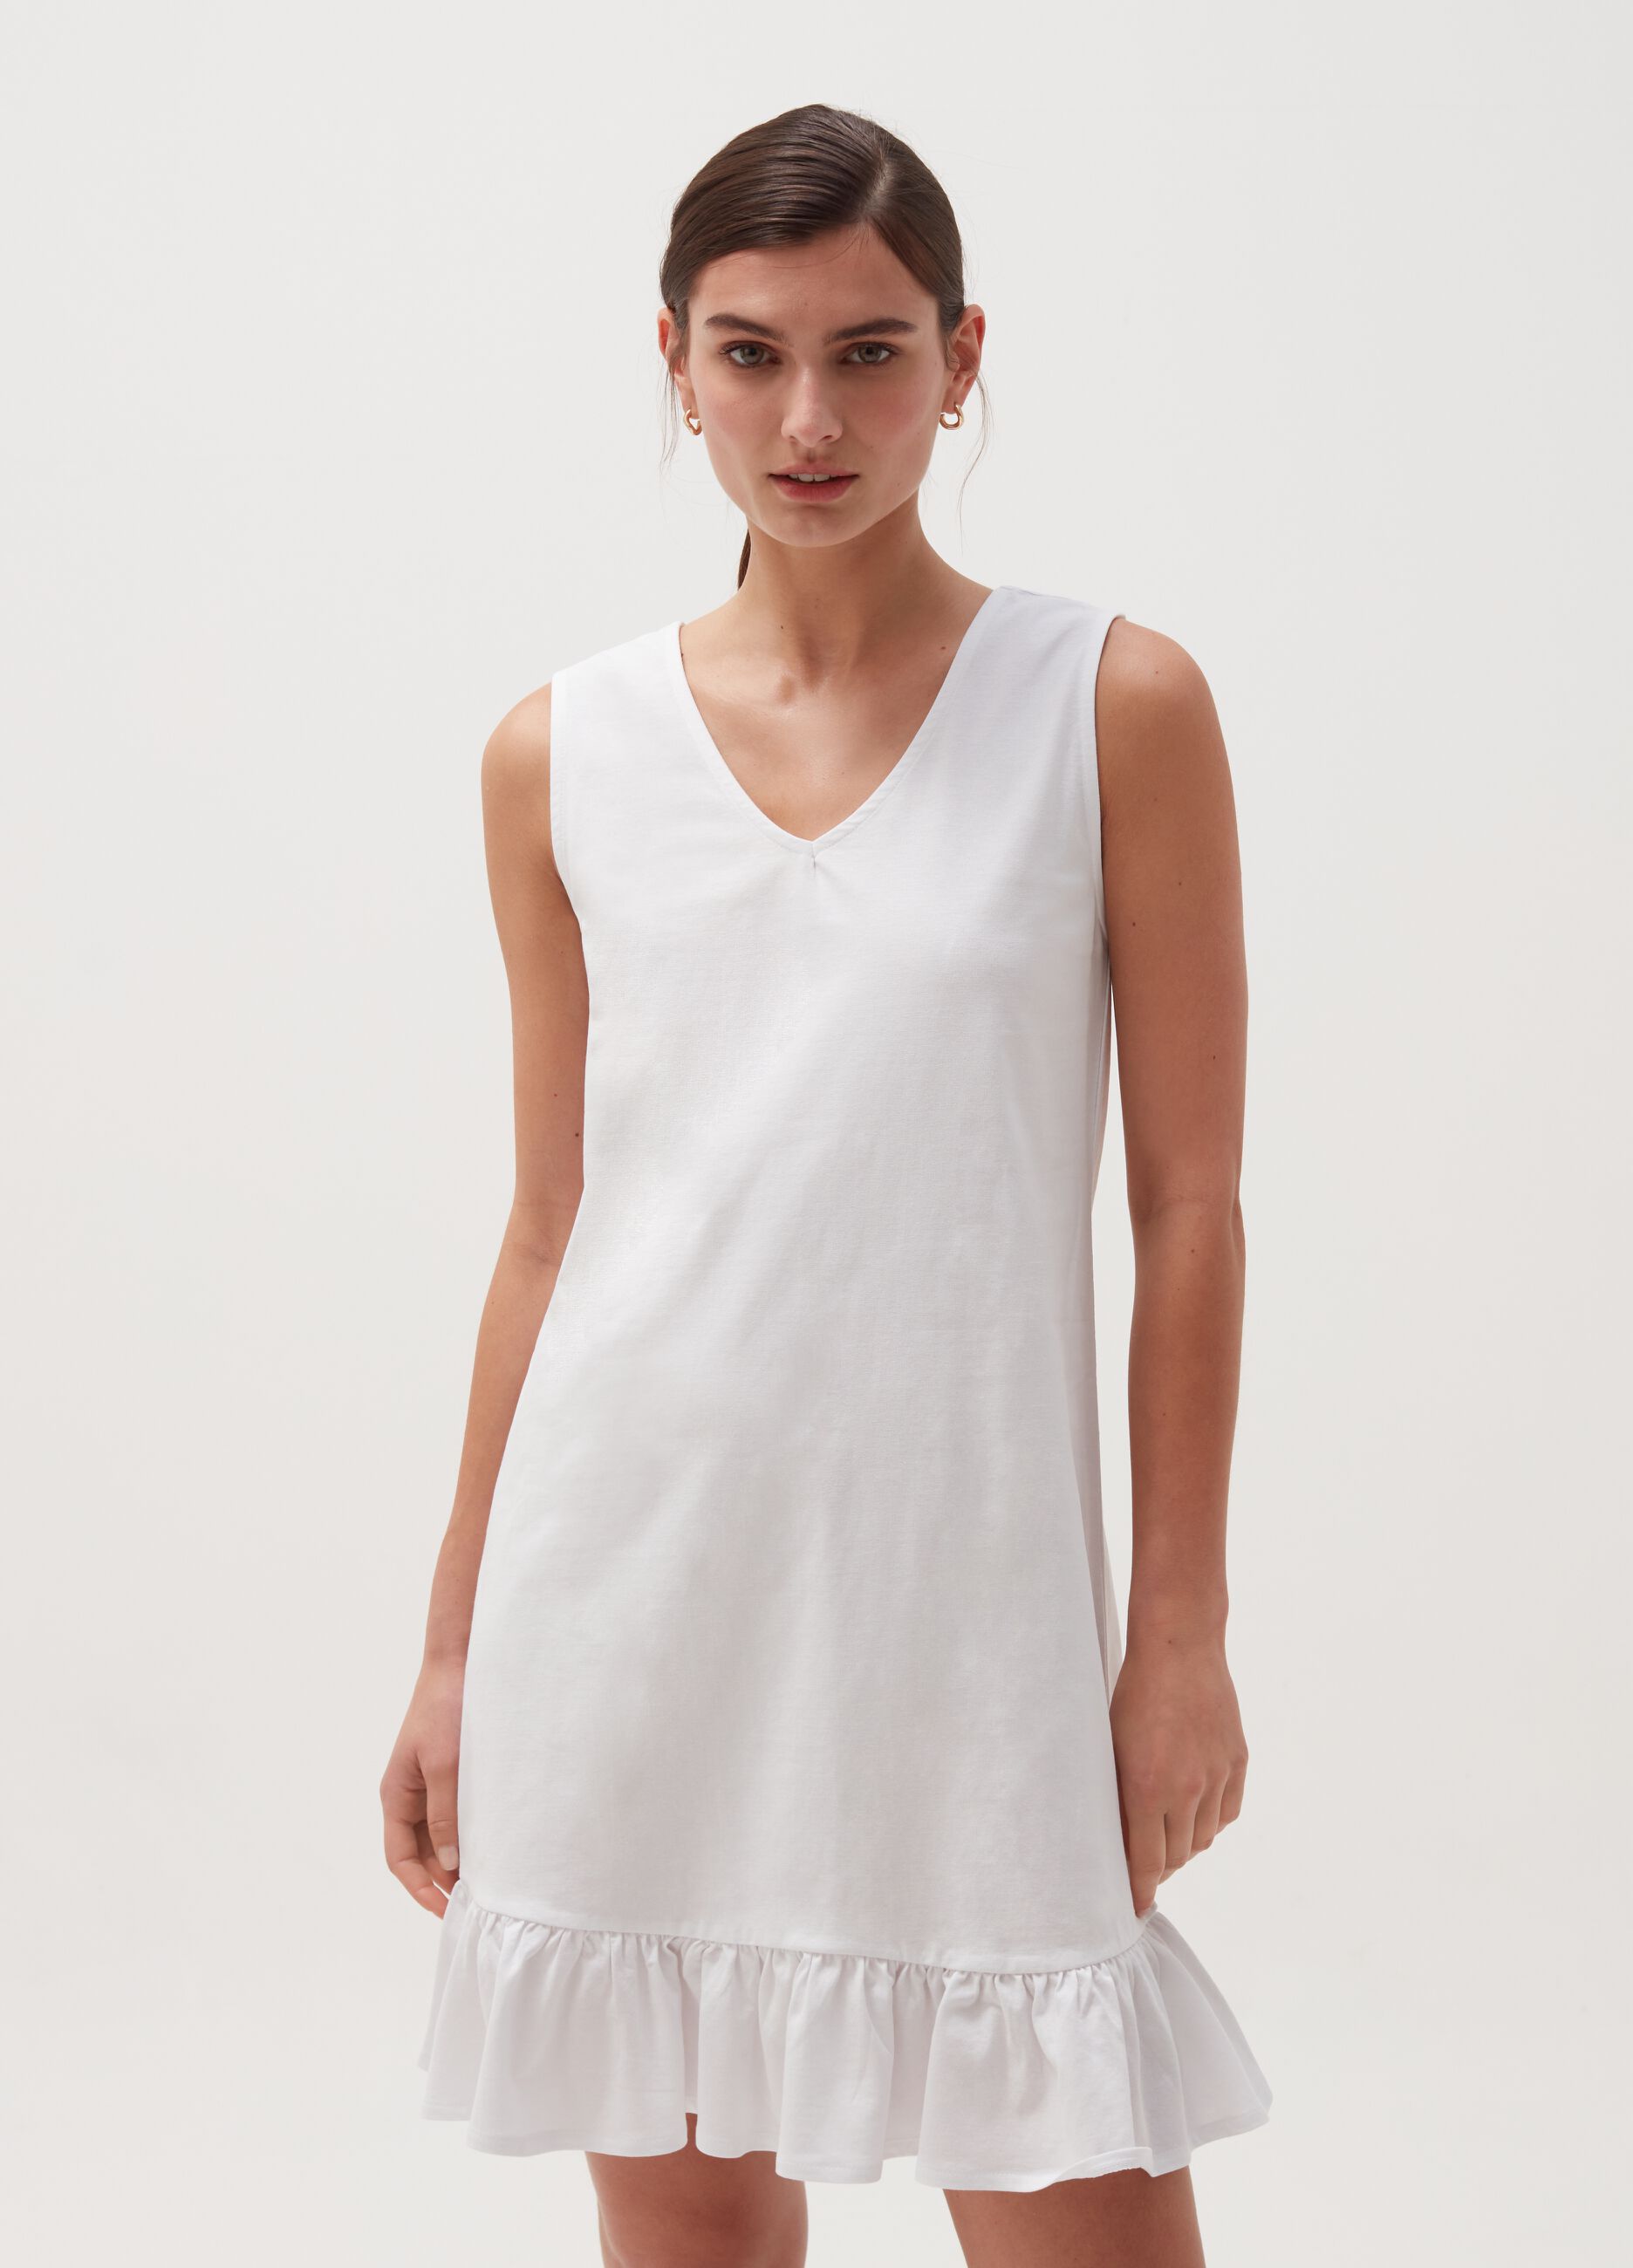 Cotton dress with V-neck and flounce